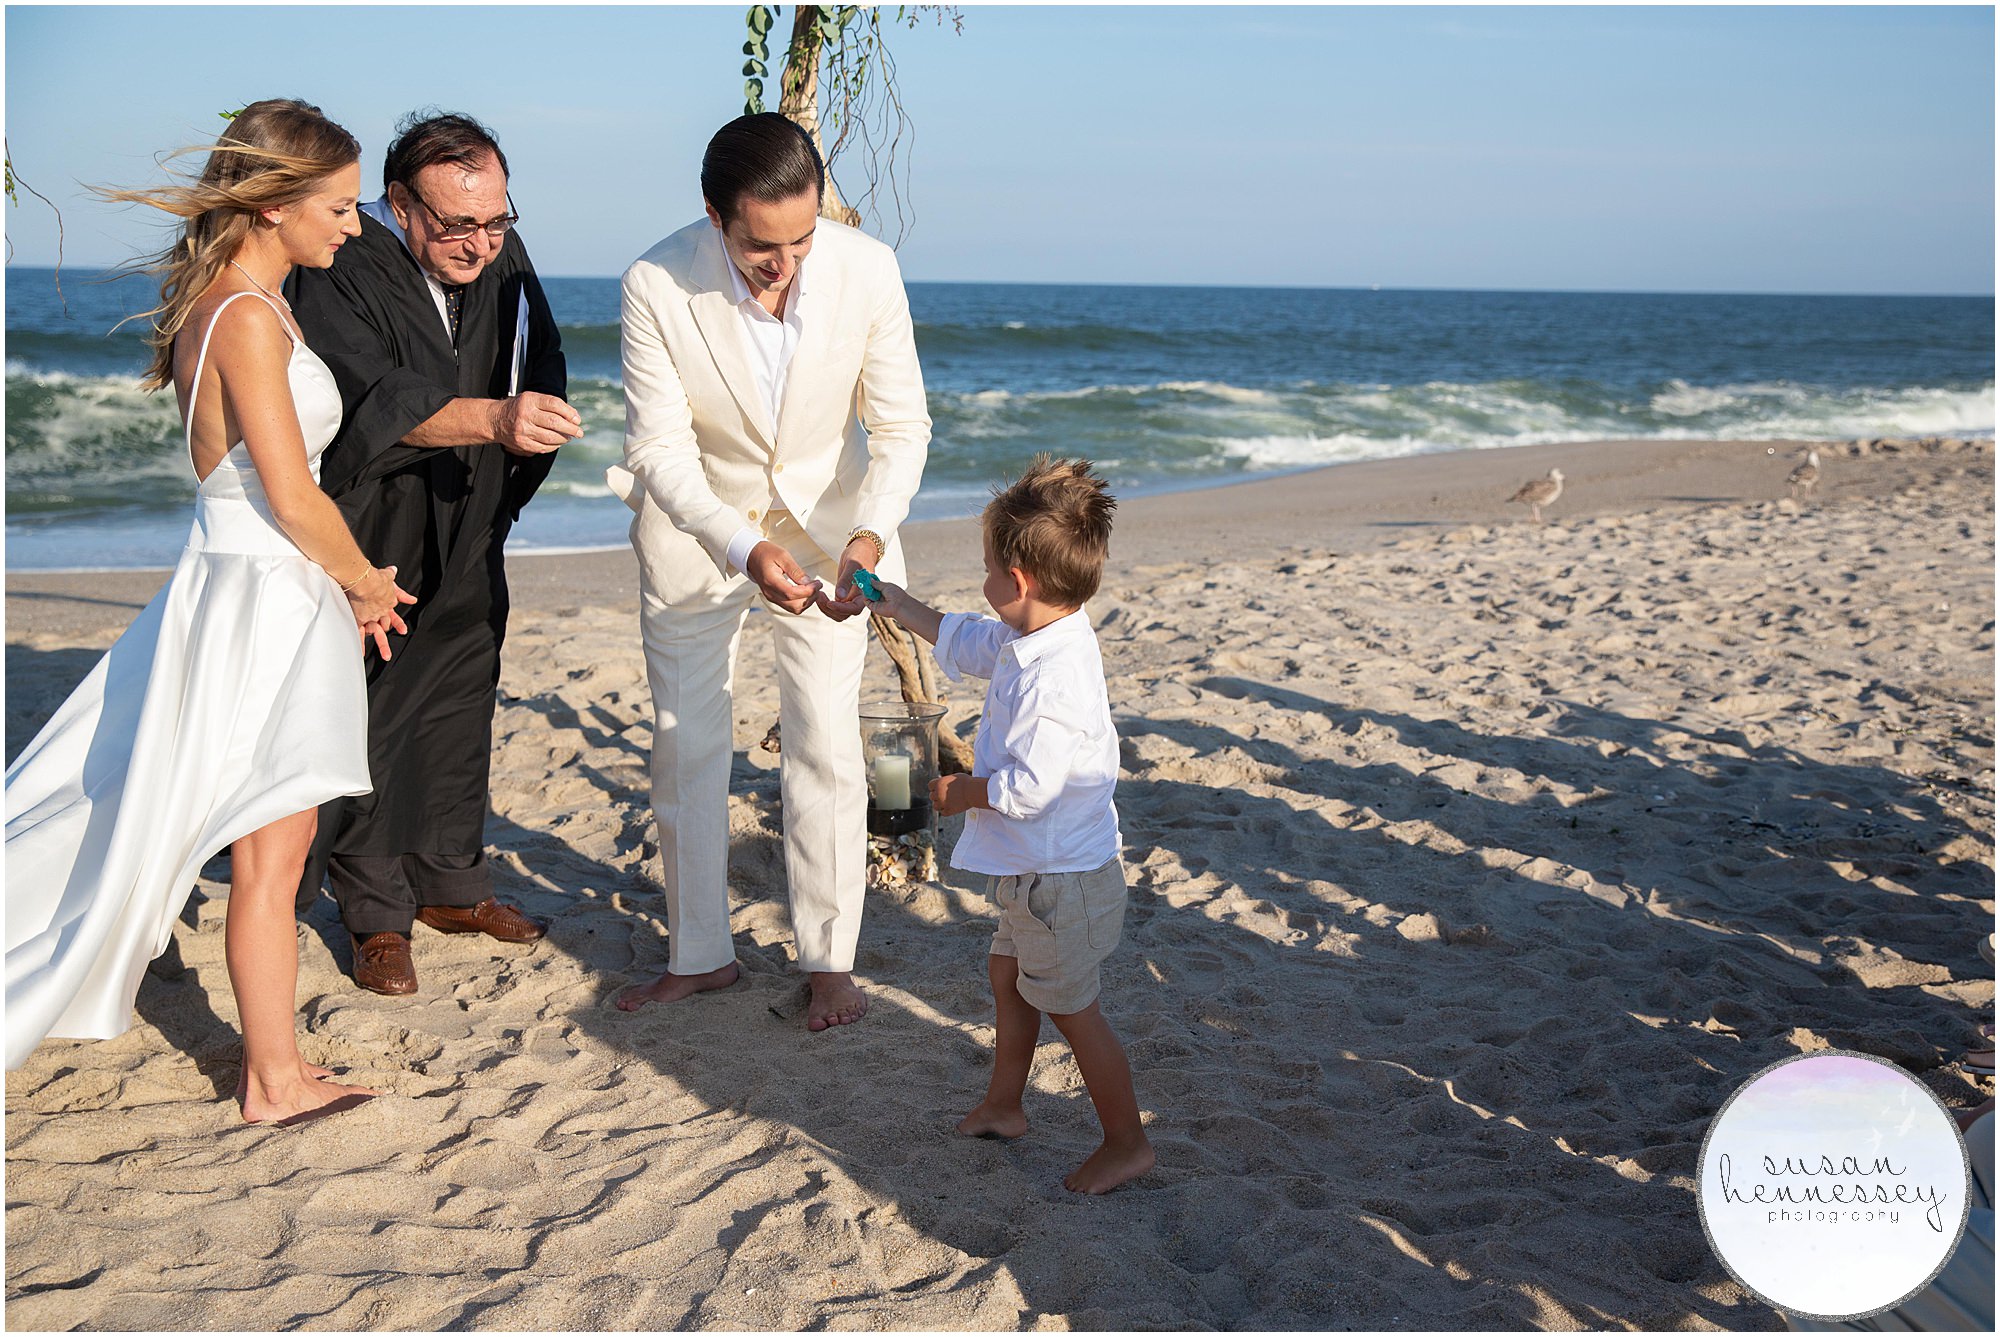 The ring bearer hands the groom the rings at beach wedding